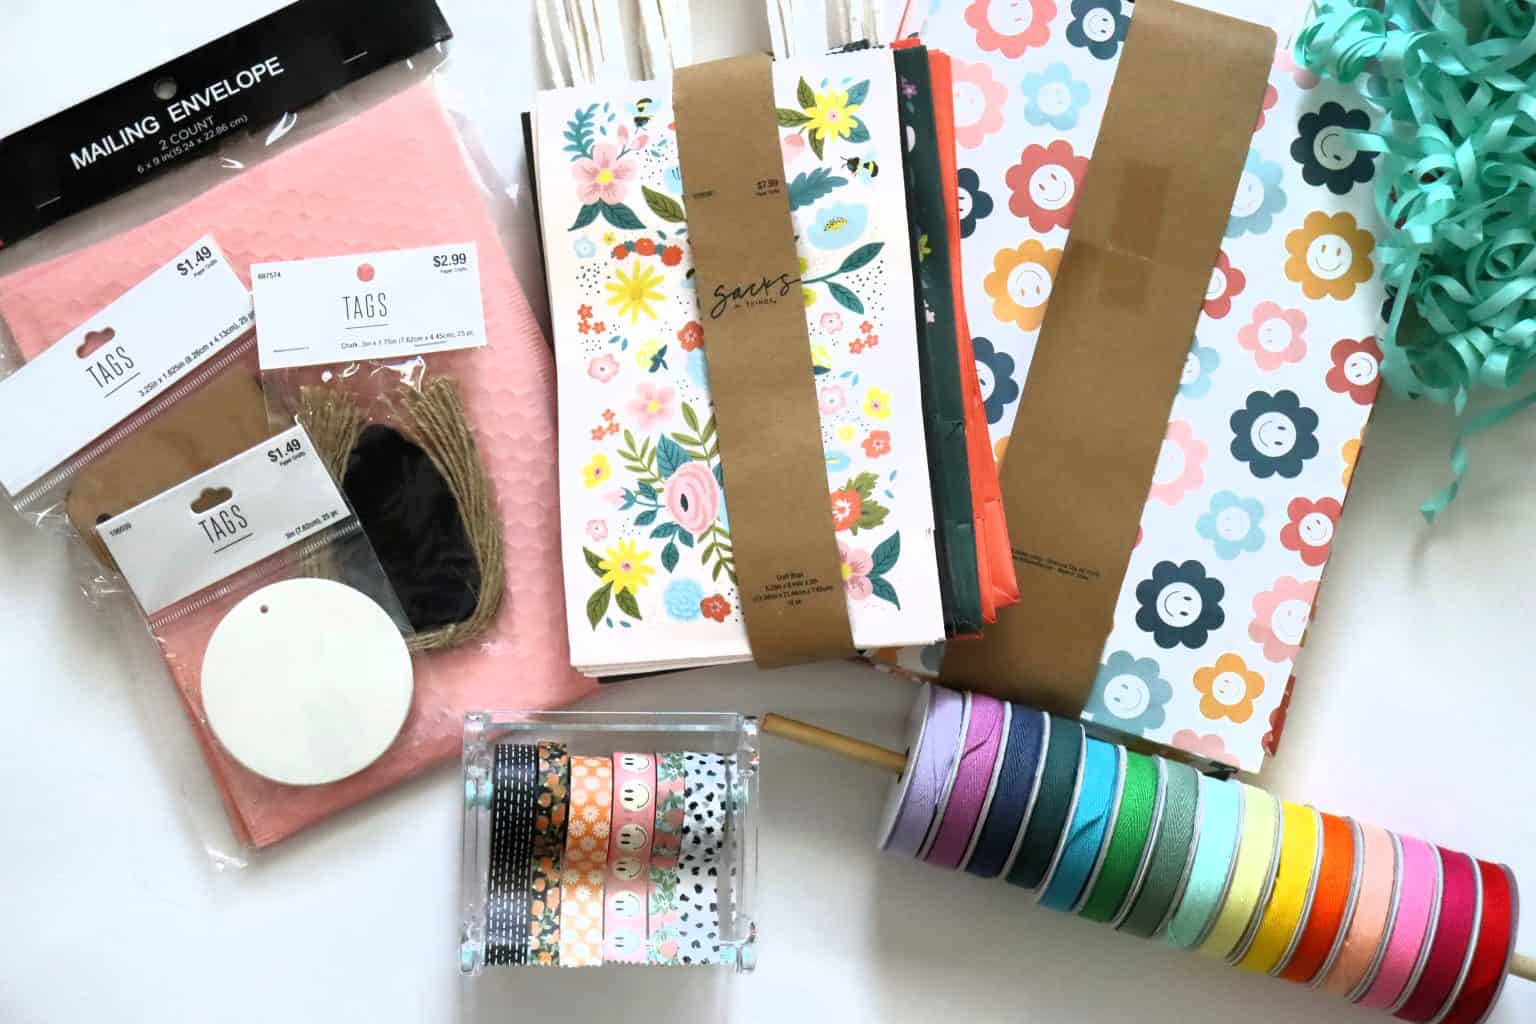 DIY a gift-wrapping station in a closet! - A girl and a glue gun